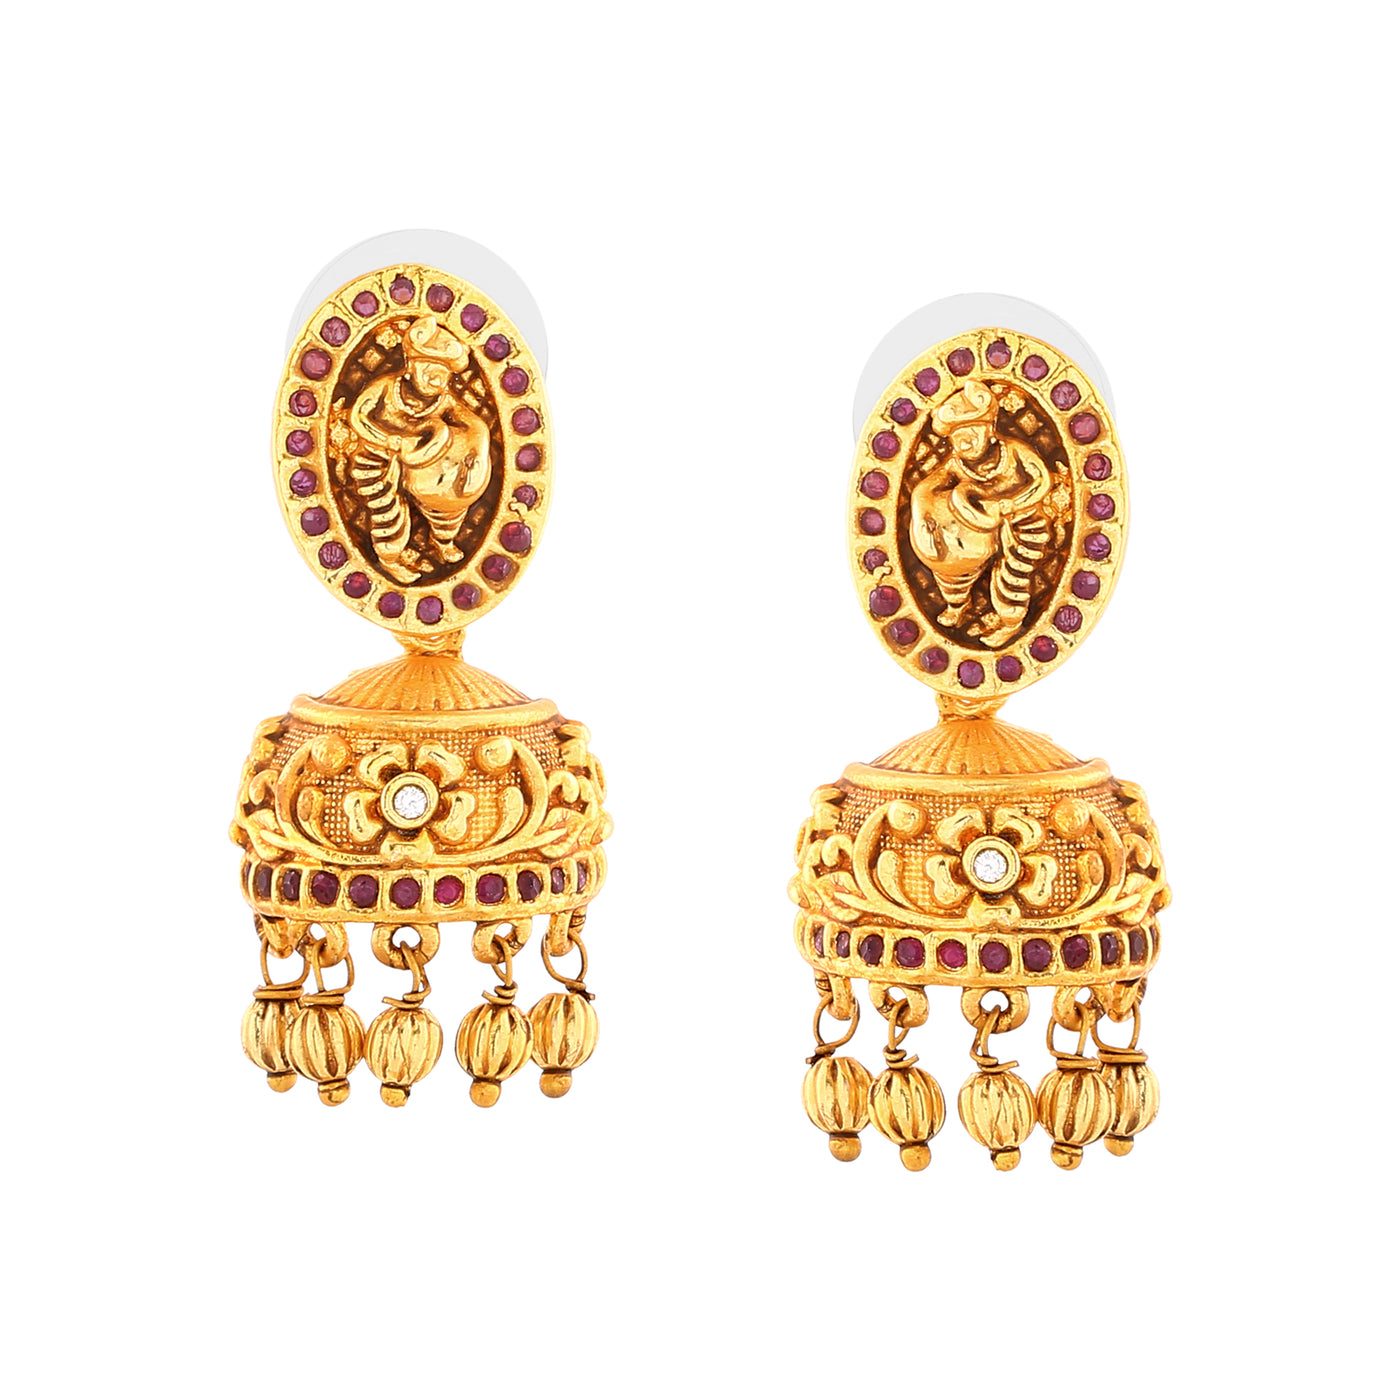 Wedding Jewelry Earring in Gold or Silver - Style E16